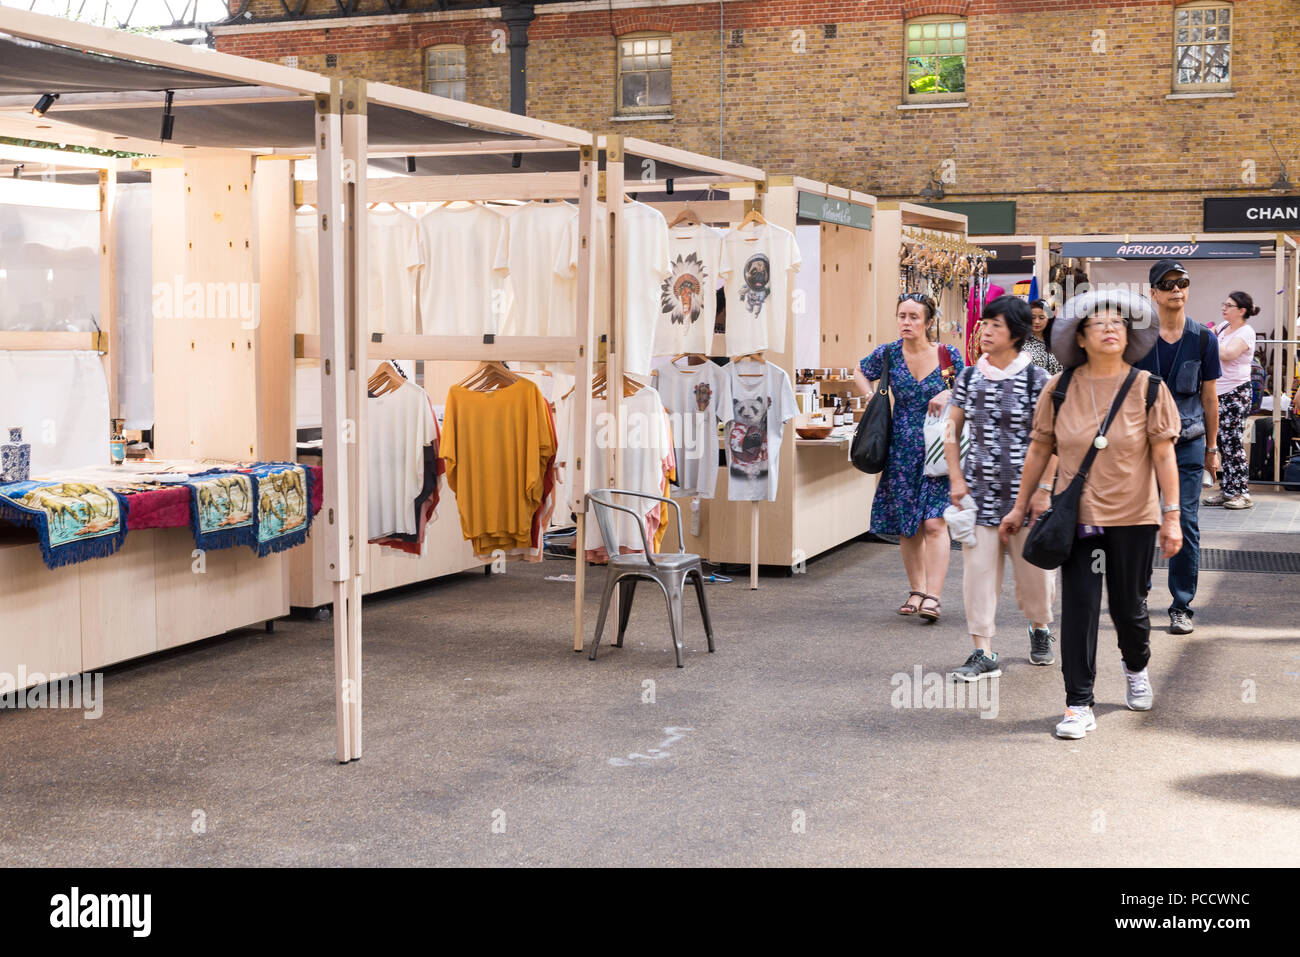 People shopping and walking around the stalls in Old Spitalfields indoor market. Spitalfields, East London, UK Stock Photo